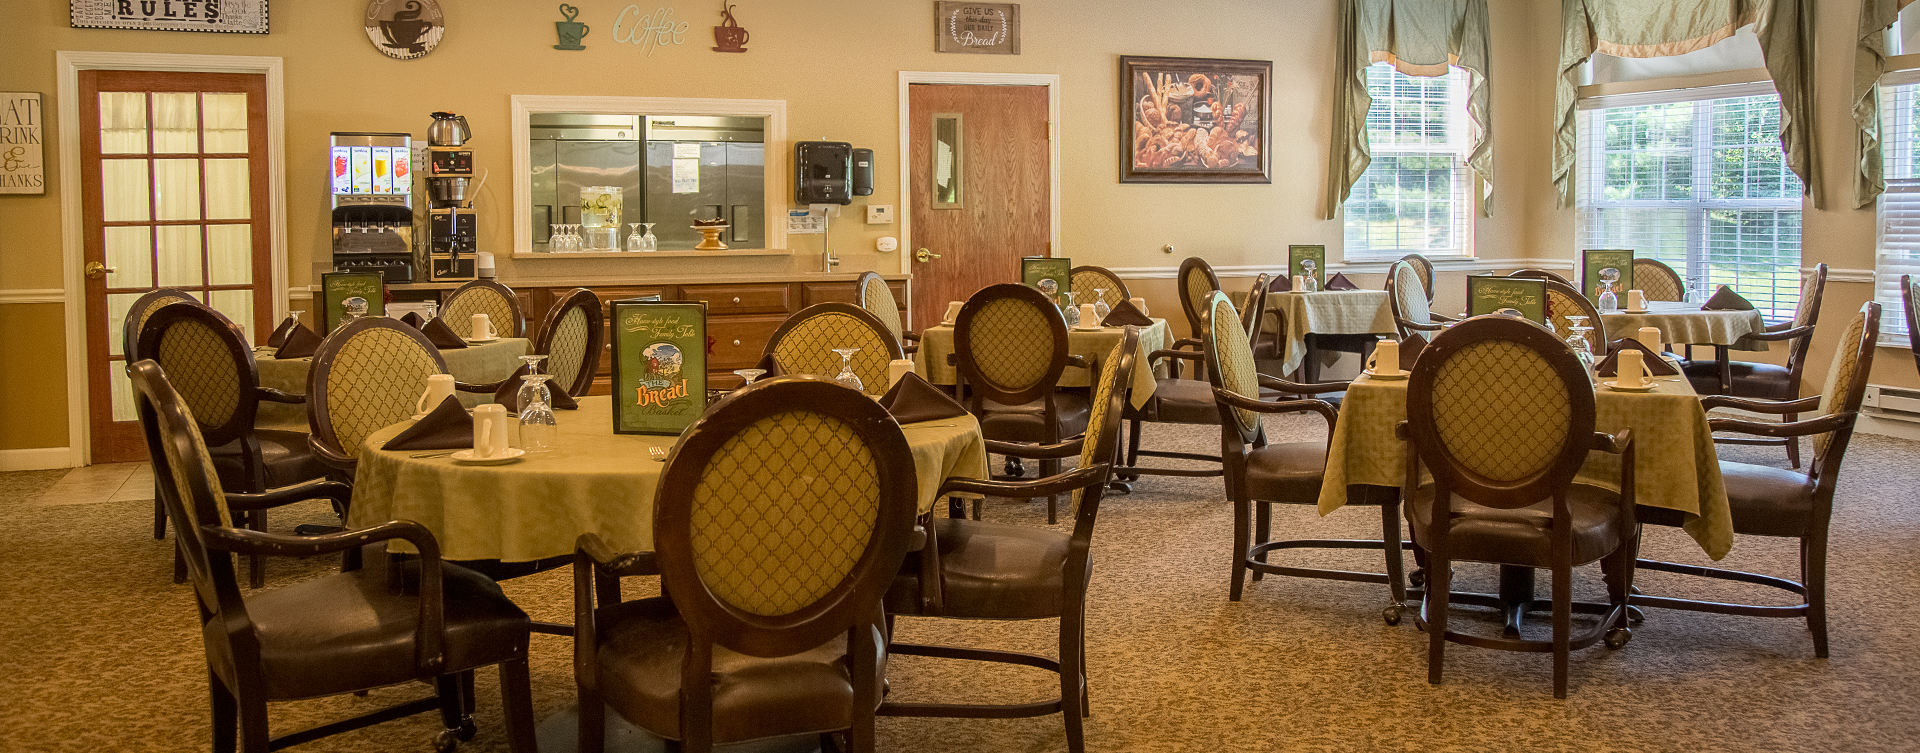 Food is best when shared with friends in the dining room at Bickford of Moline